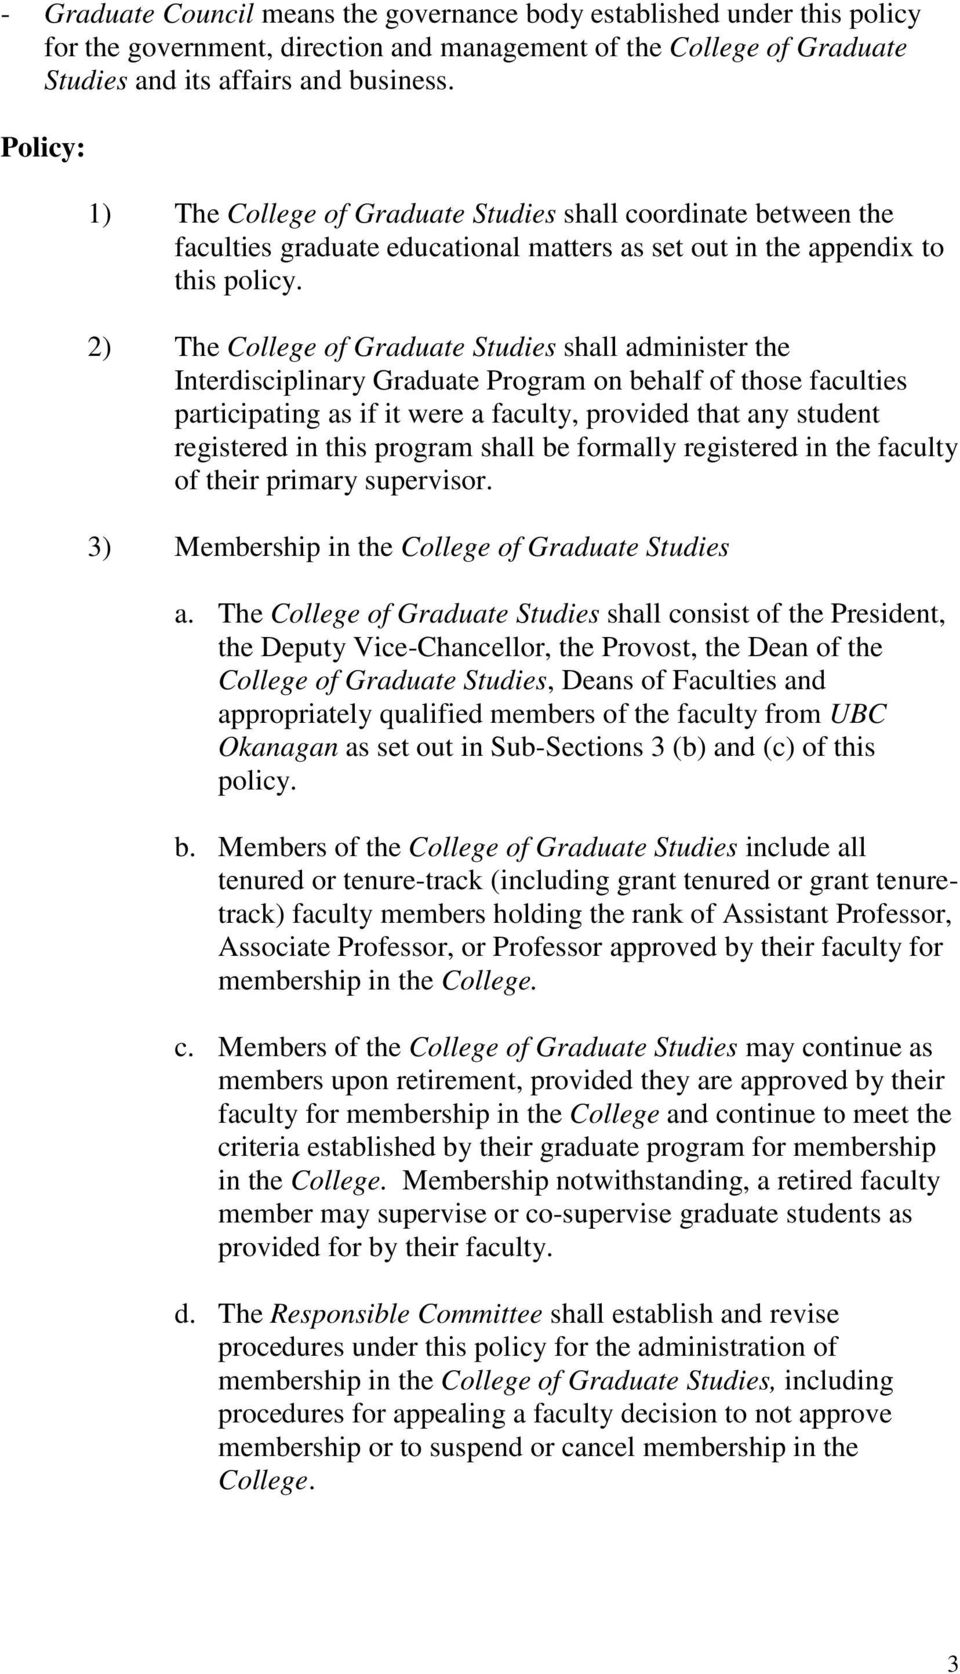 2) The College of Graduate Studies shall administer the Interdisciplinary Graduate Program on behalf of those faculties participating as if it were a faculty, provided that any student registered in